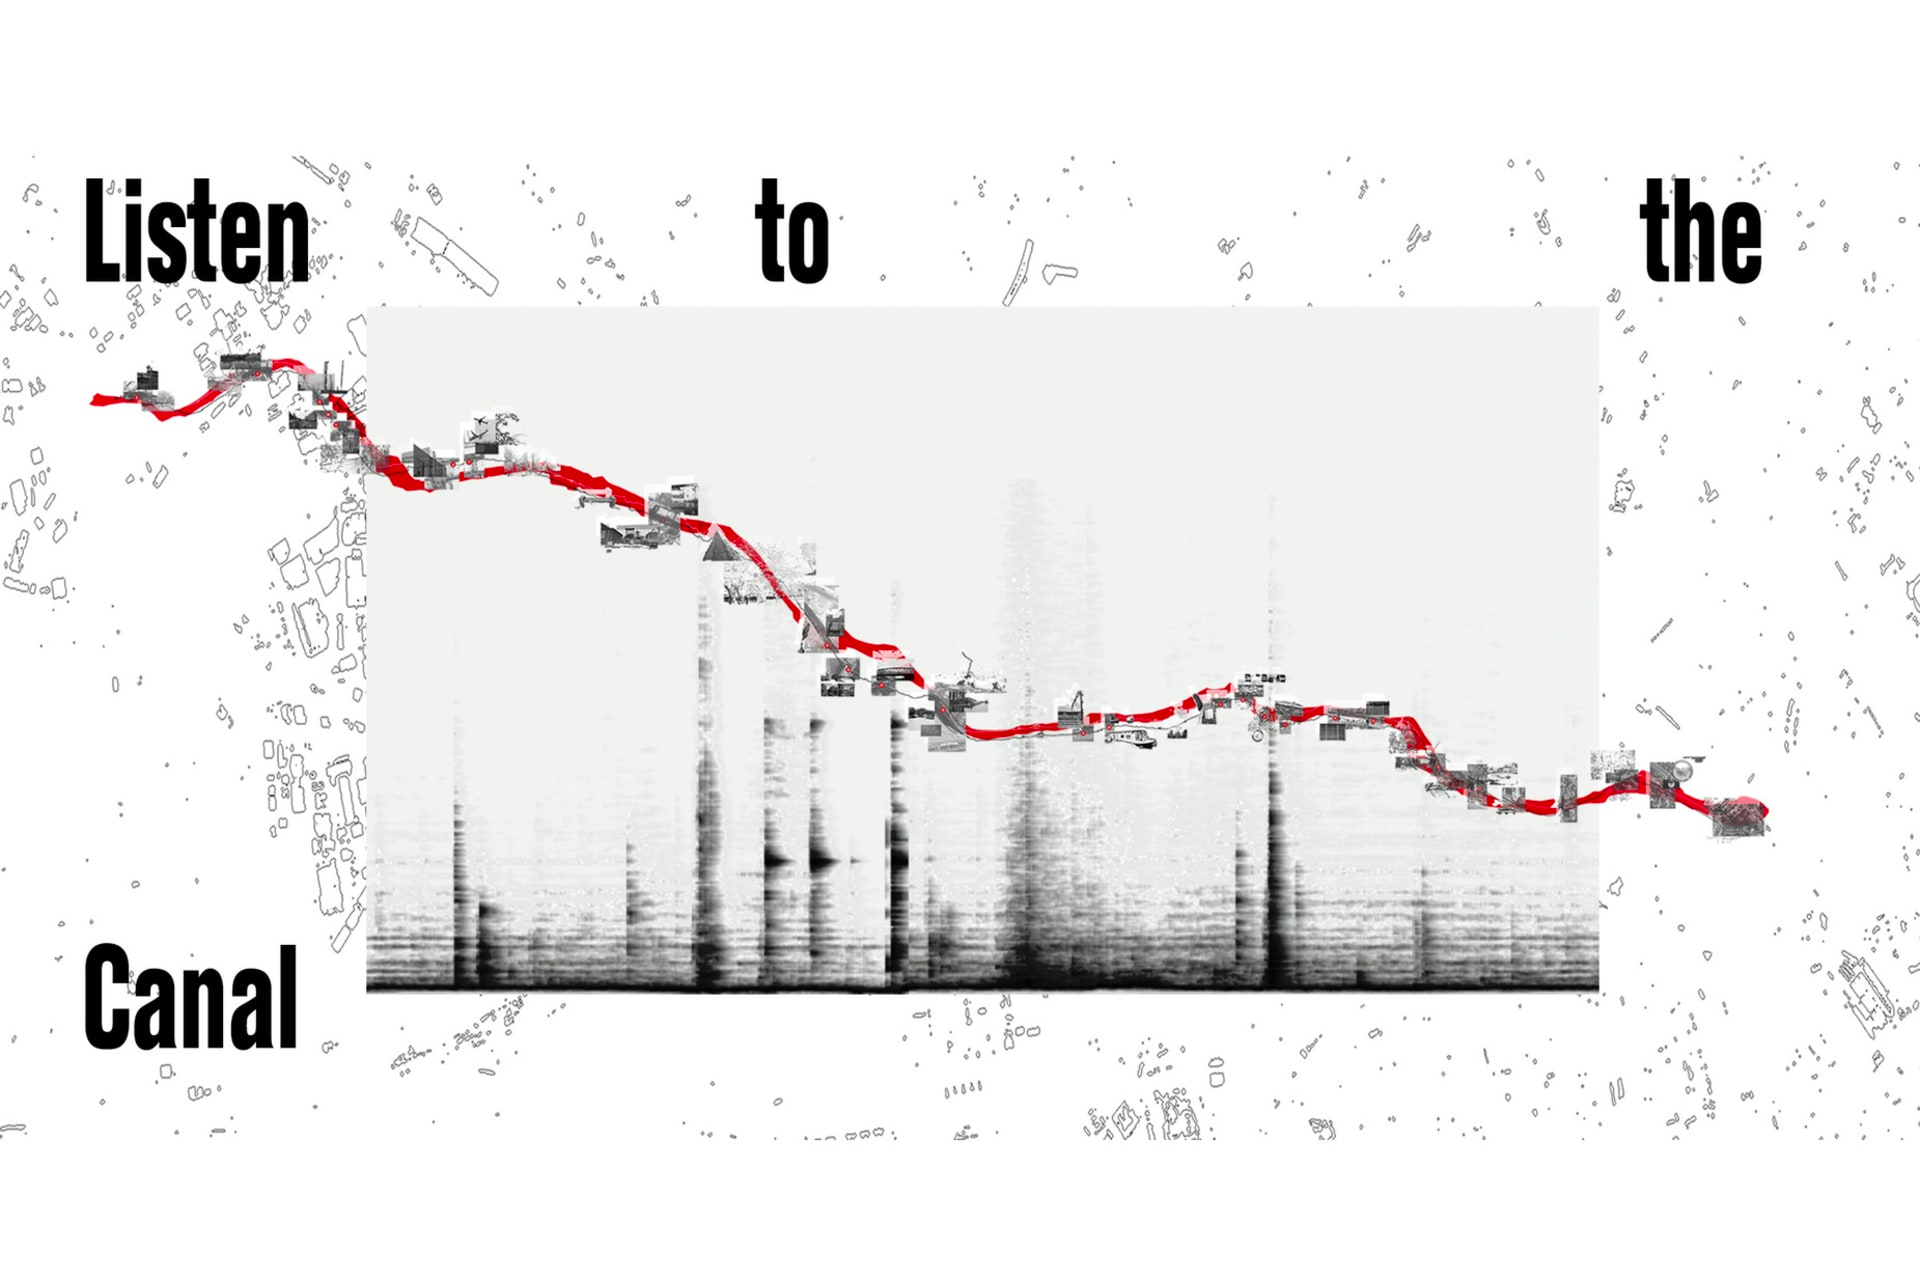 Image of a red wavy line, running across a black and white abstract image with black vertical lines, over a black and white patterned background and text reading ‘Listen to the canal’.